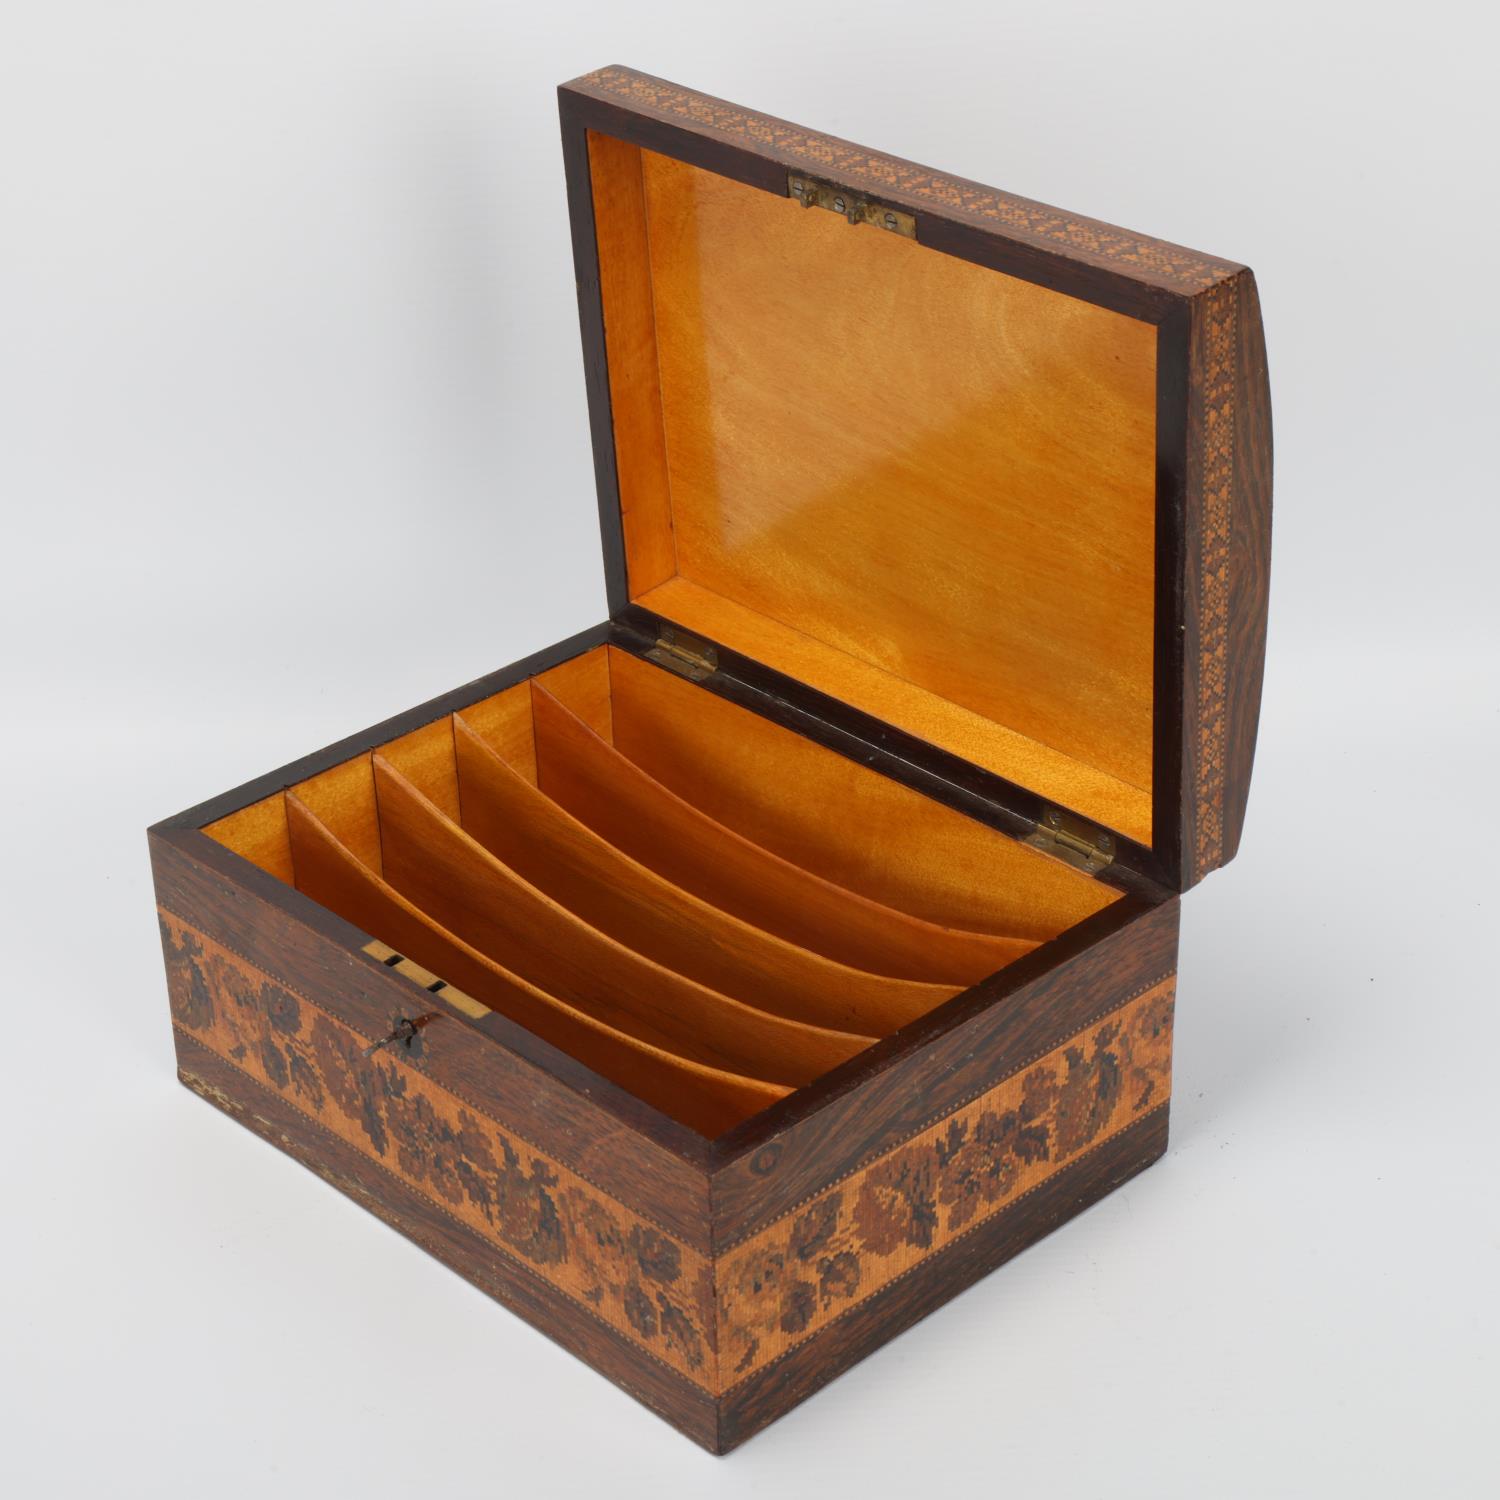 Tunbridge Ware, 19th century rosewood and micro-mosaic dome-top stationery box, pictorial lid - Image 3 of 3